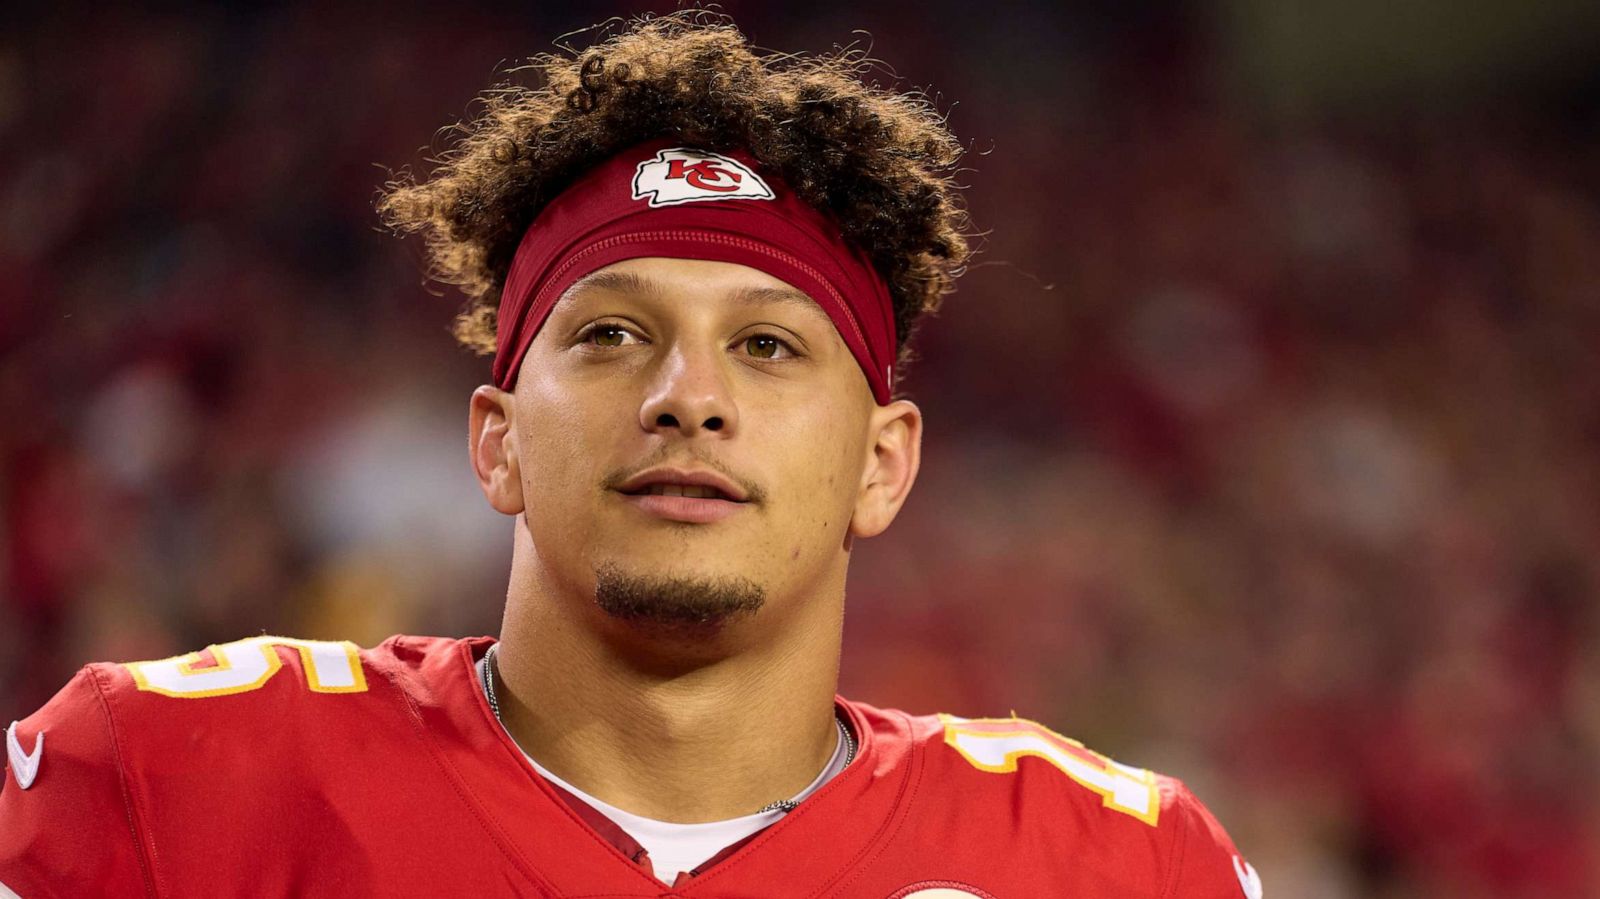 The Internet Becomes Obsessed With Patrick Mahomes' Wife Brittany Mahomes  After Her Super-Mom Pictures With Daughter Sterling Goes Viral -  EssentiallySports